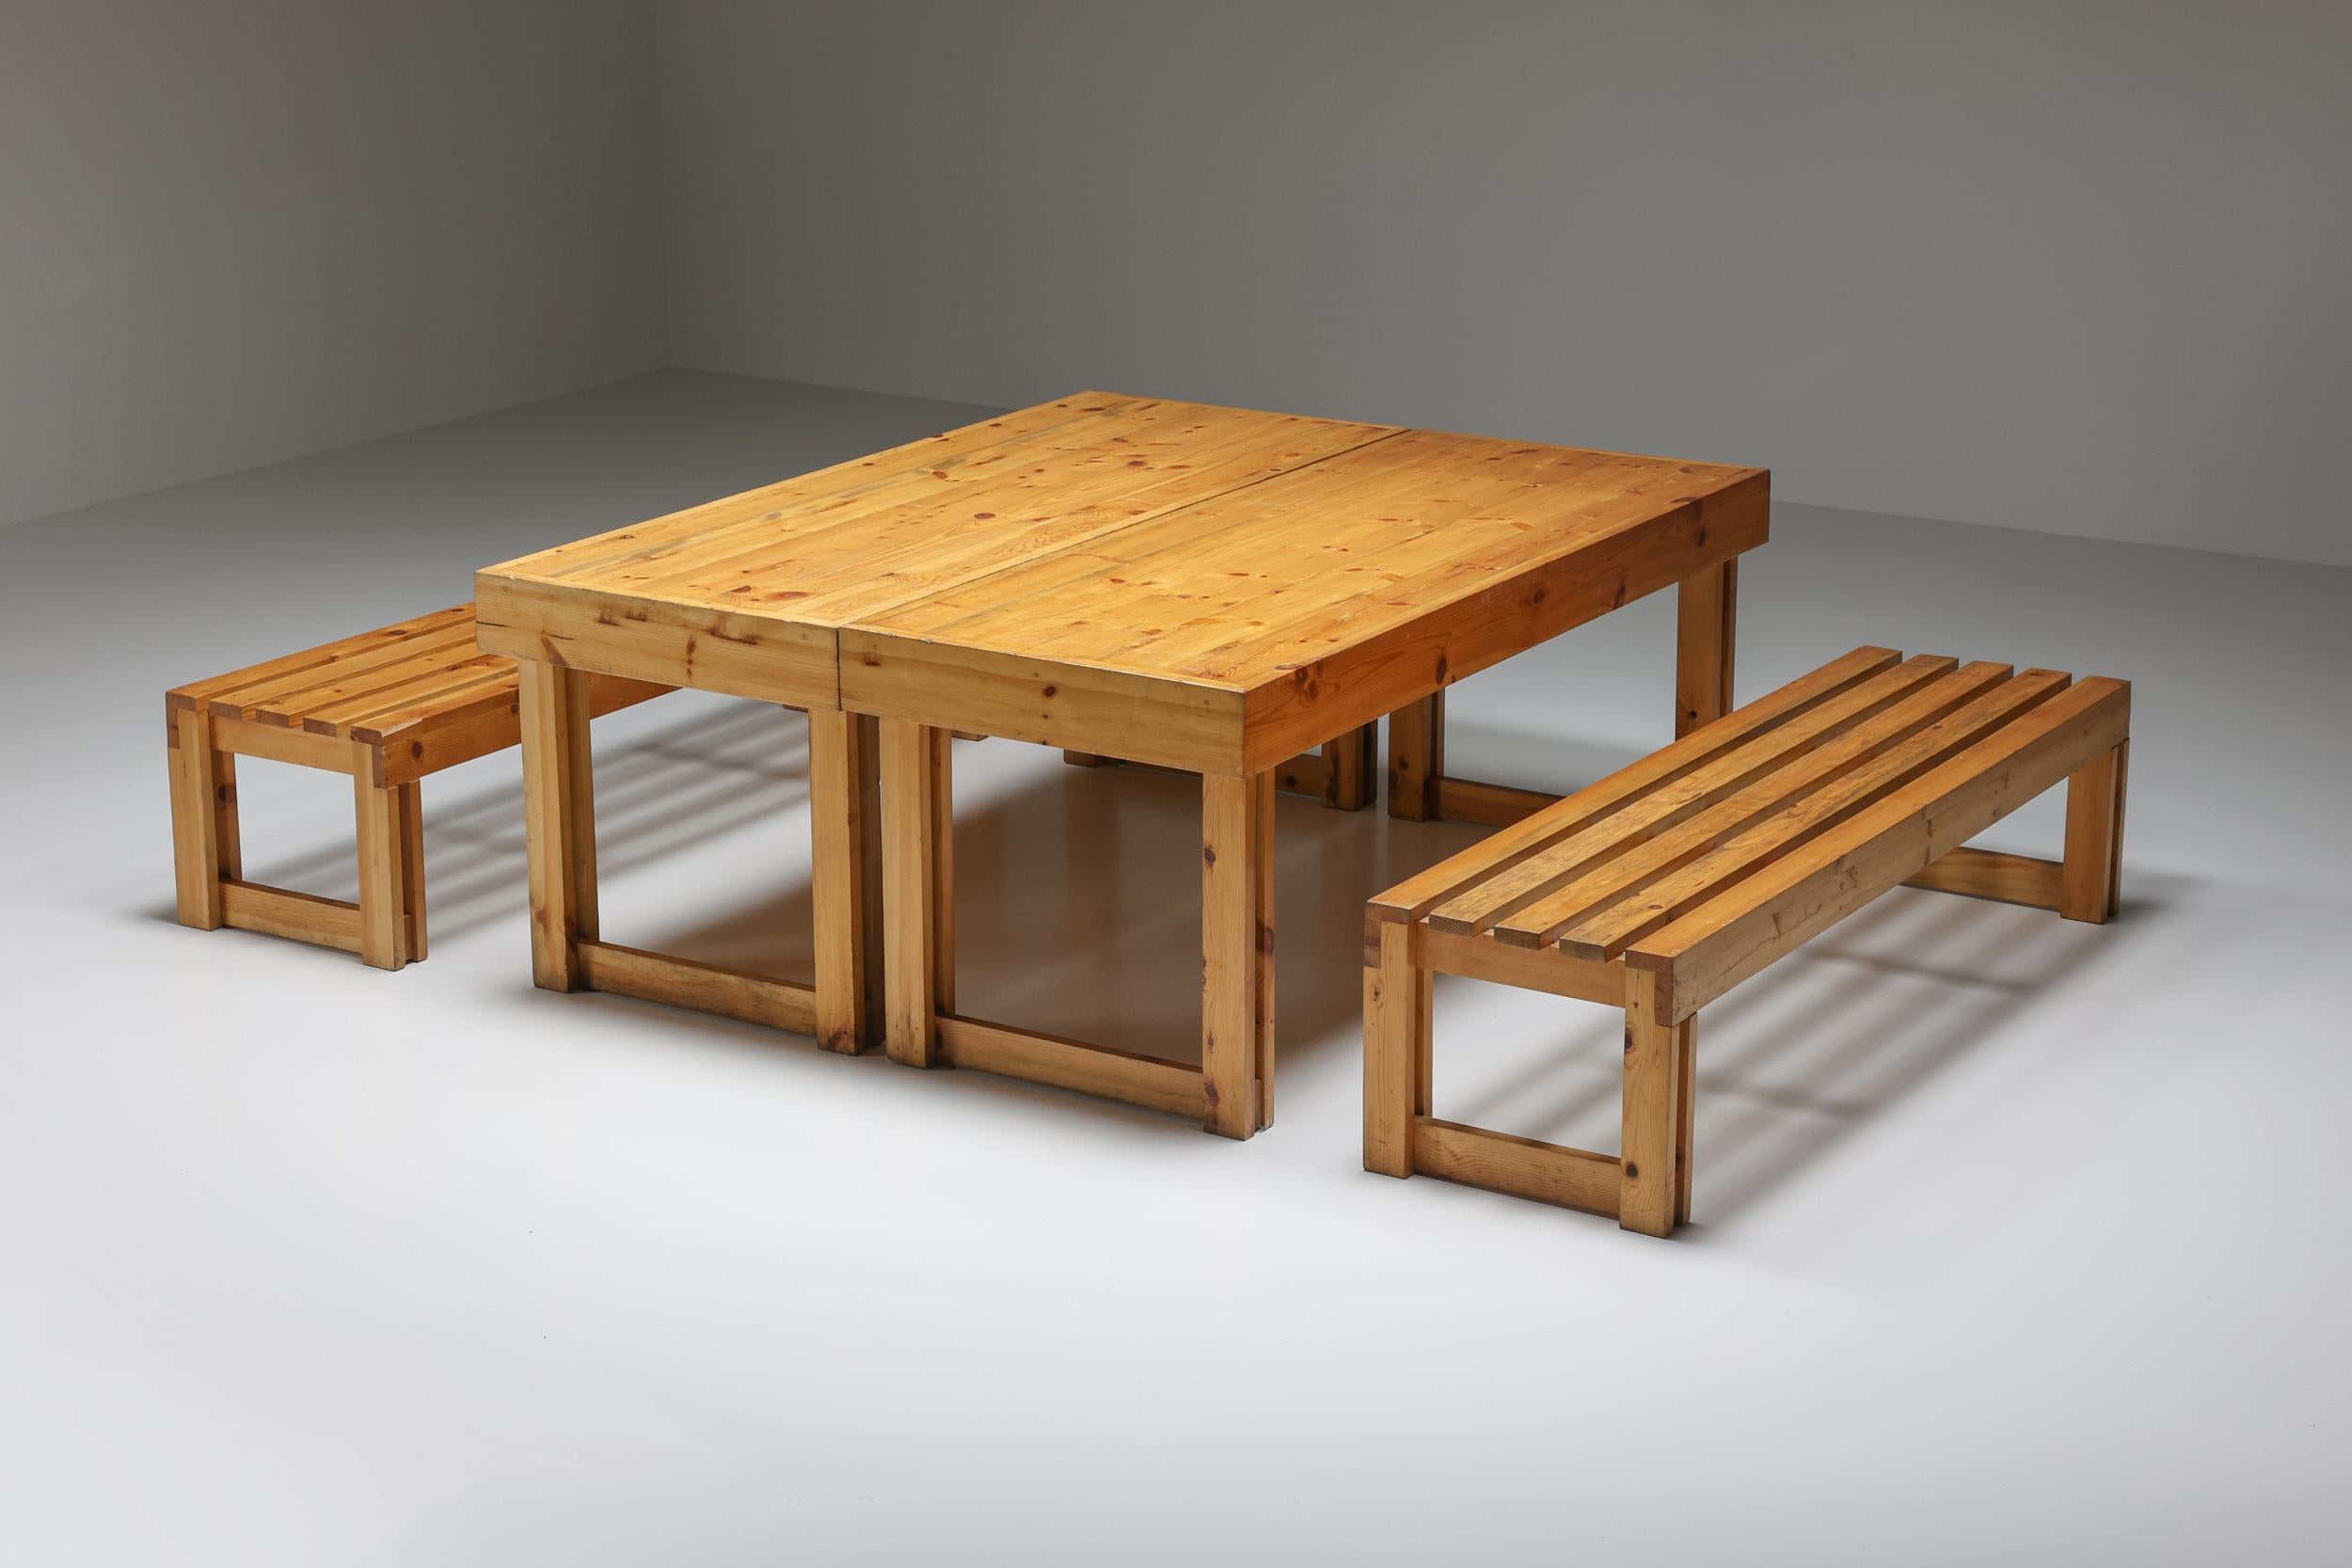 Rustic Italian Pine Bench and Table Set from Old Vineyard, Modernist, Italy, 1960's For Sale